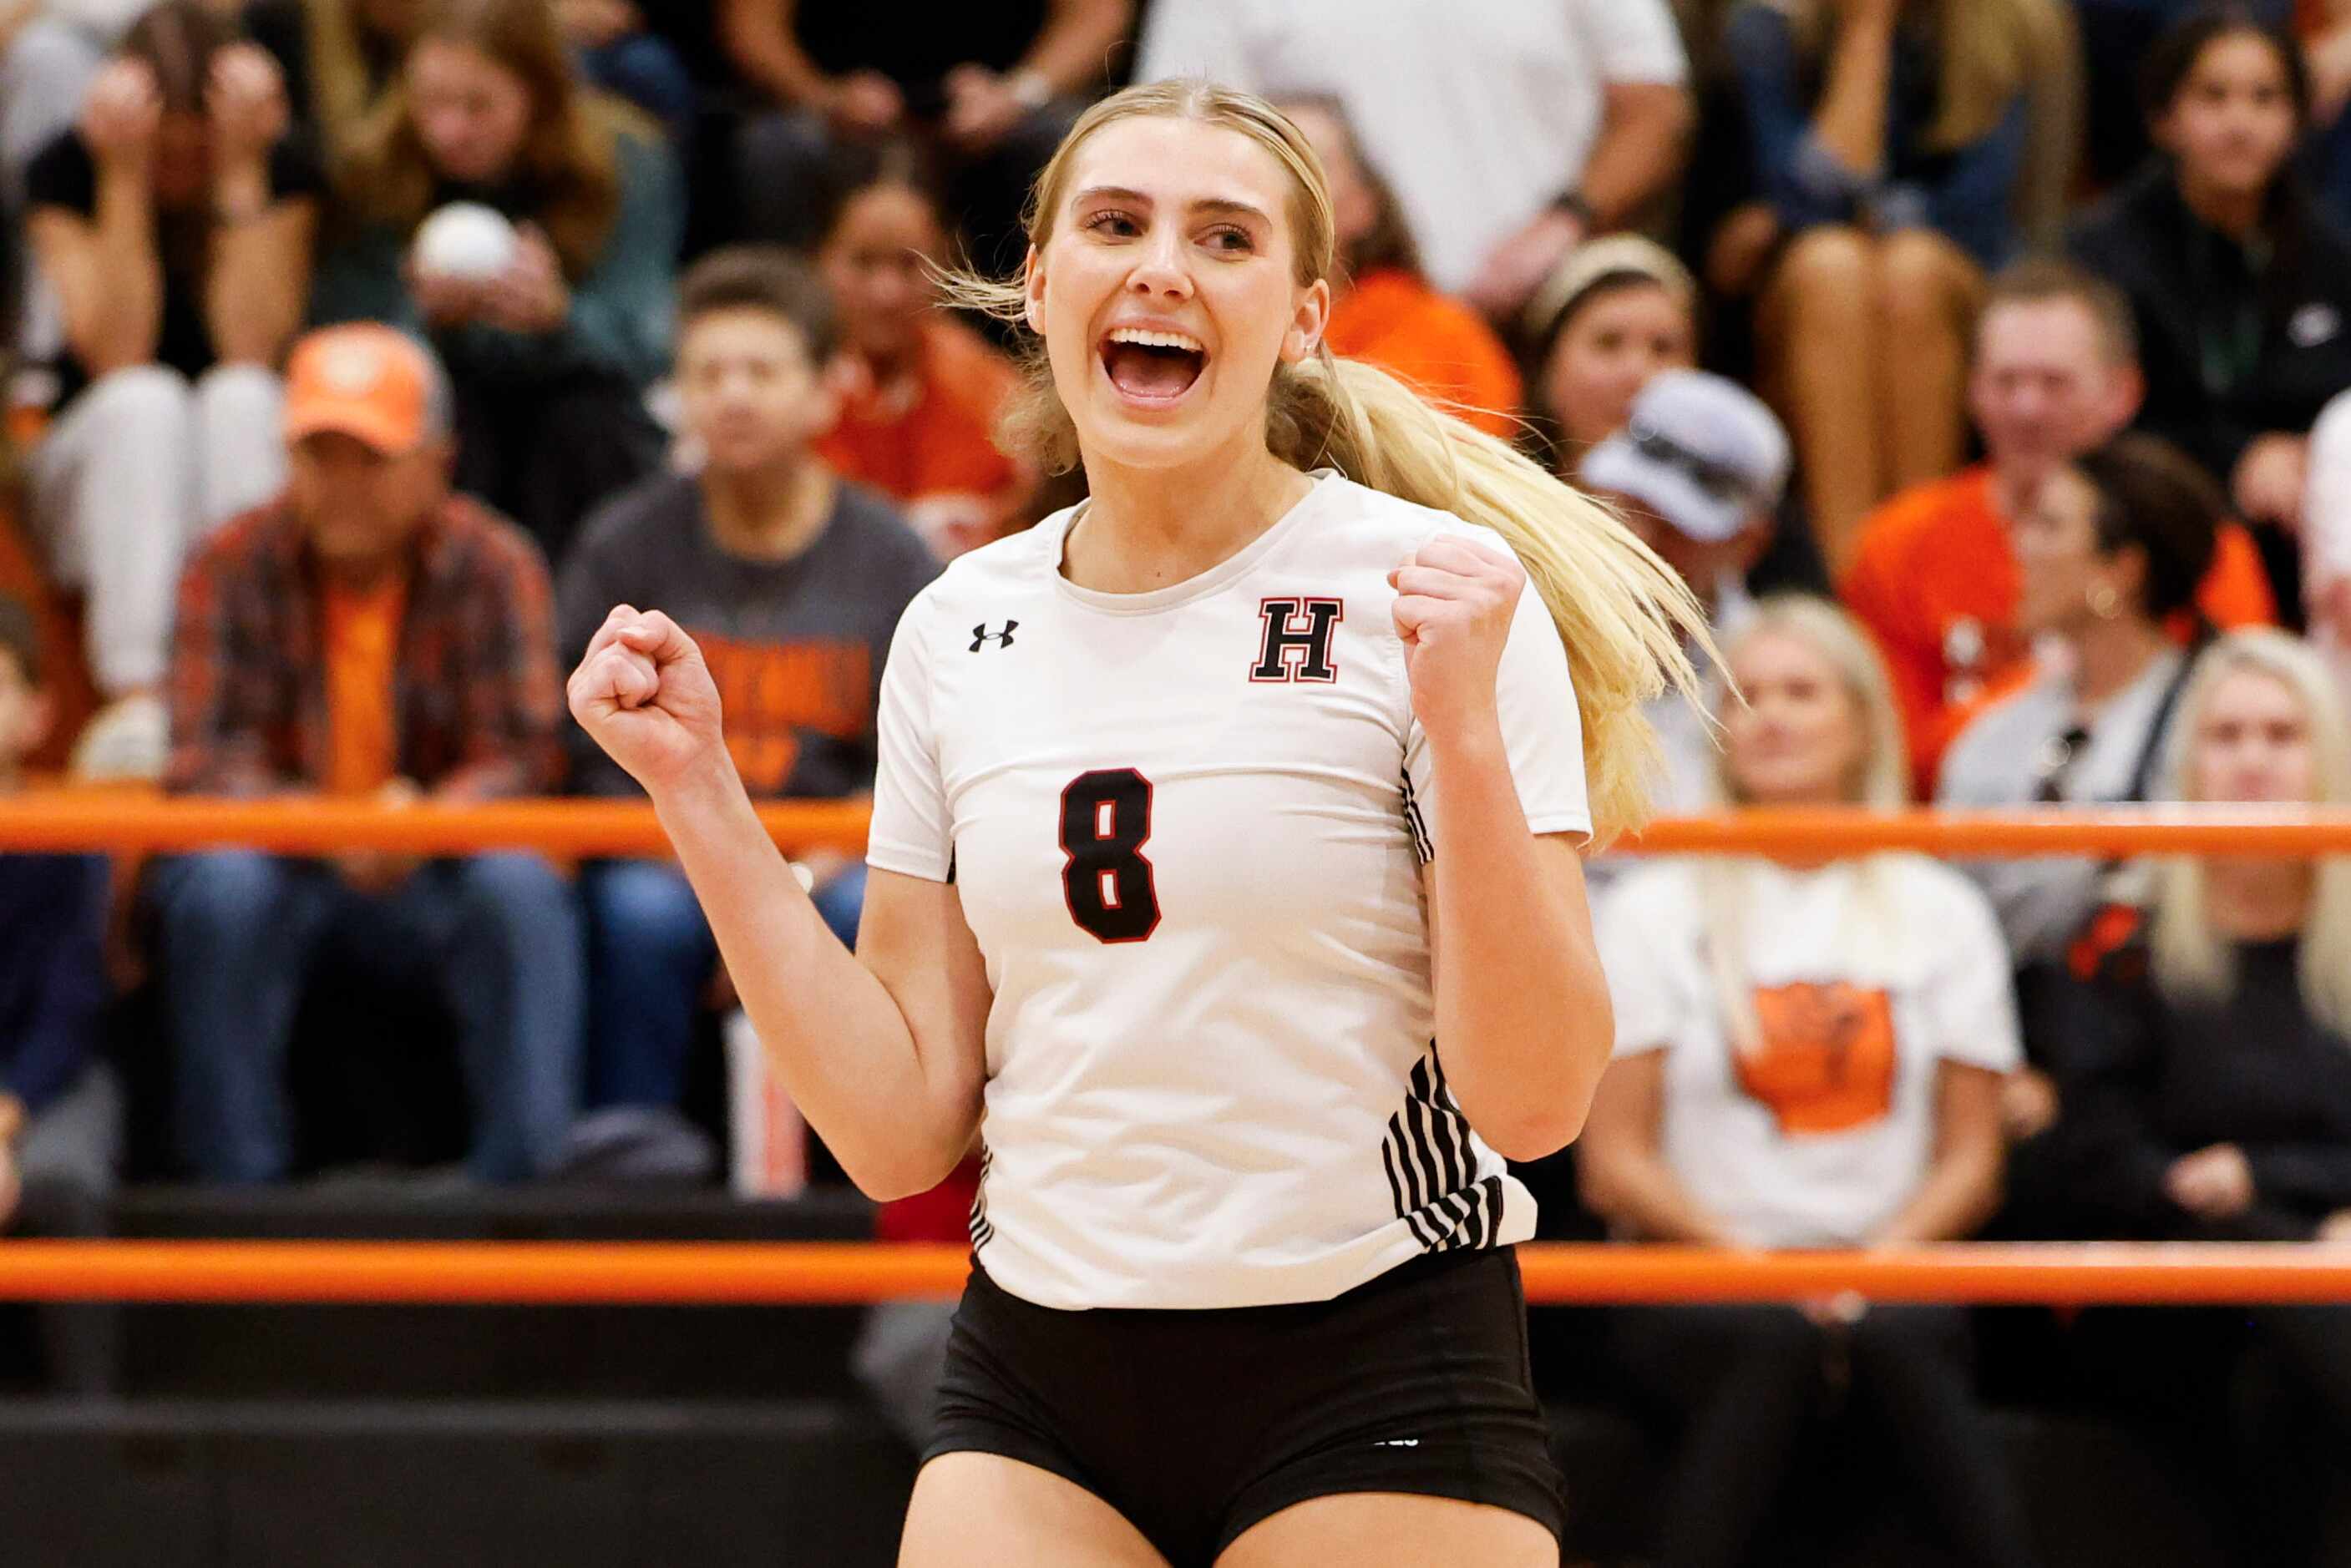 Rockwall heath’s Kenley Koetter (8) cheers after a point during a volleyball game against...